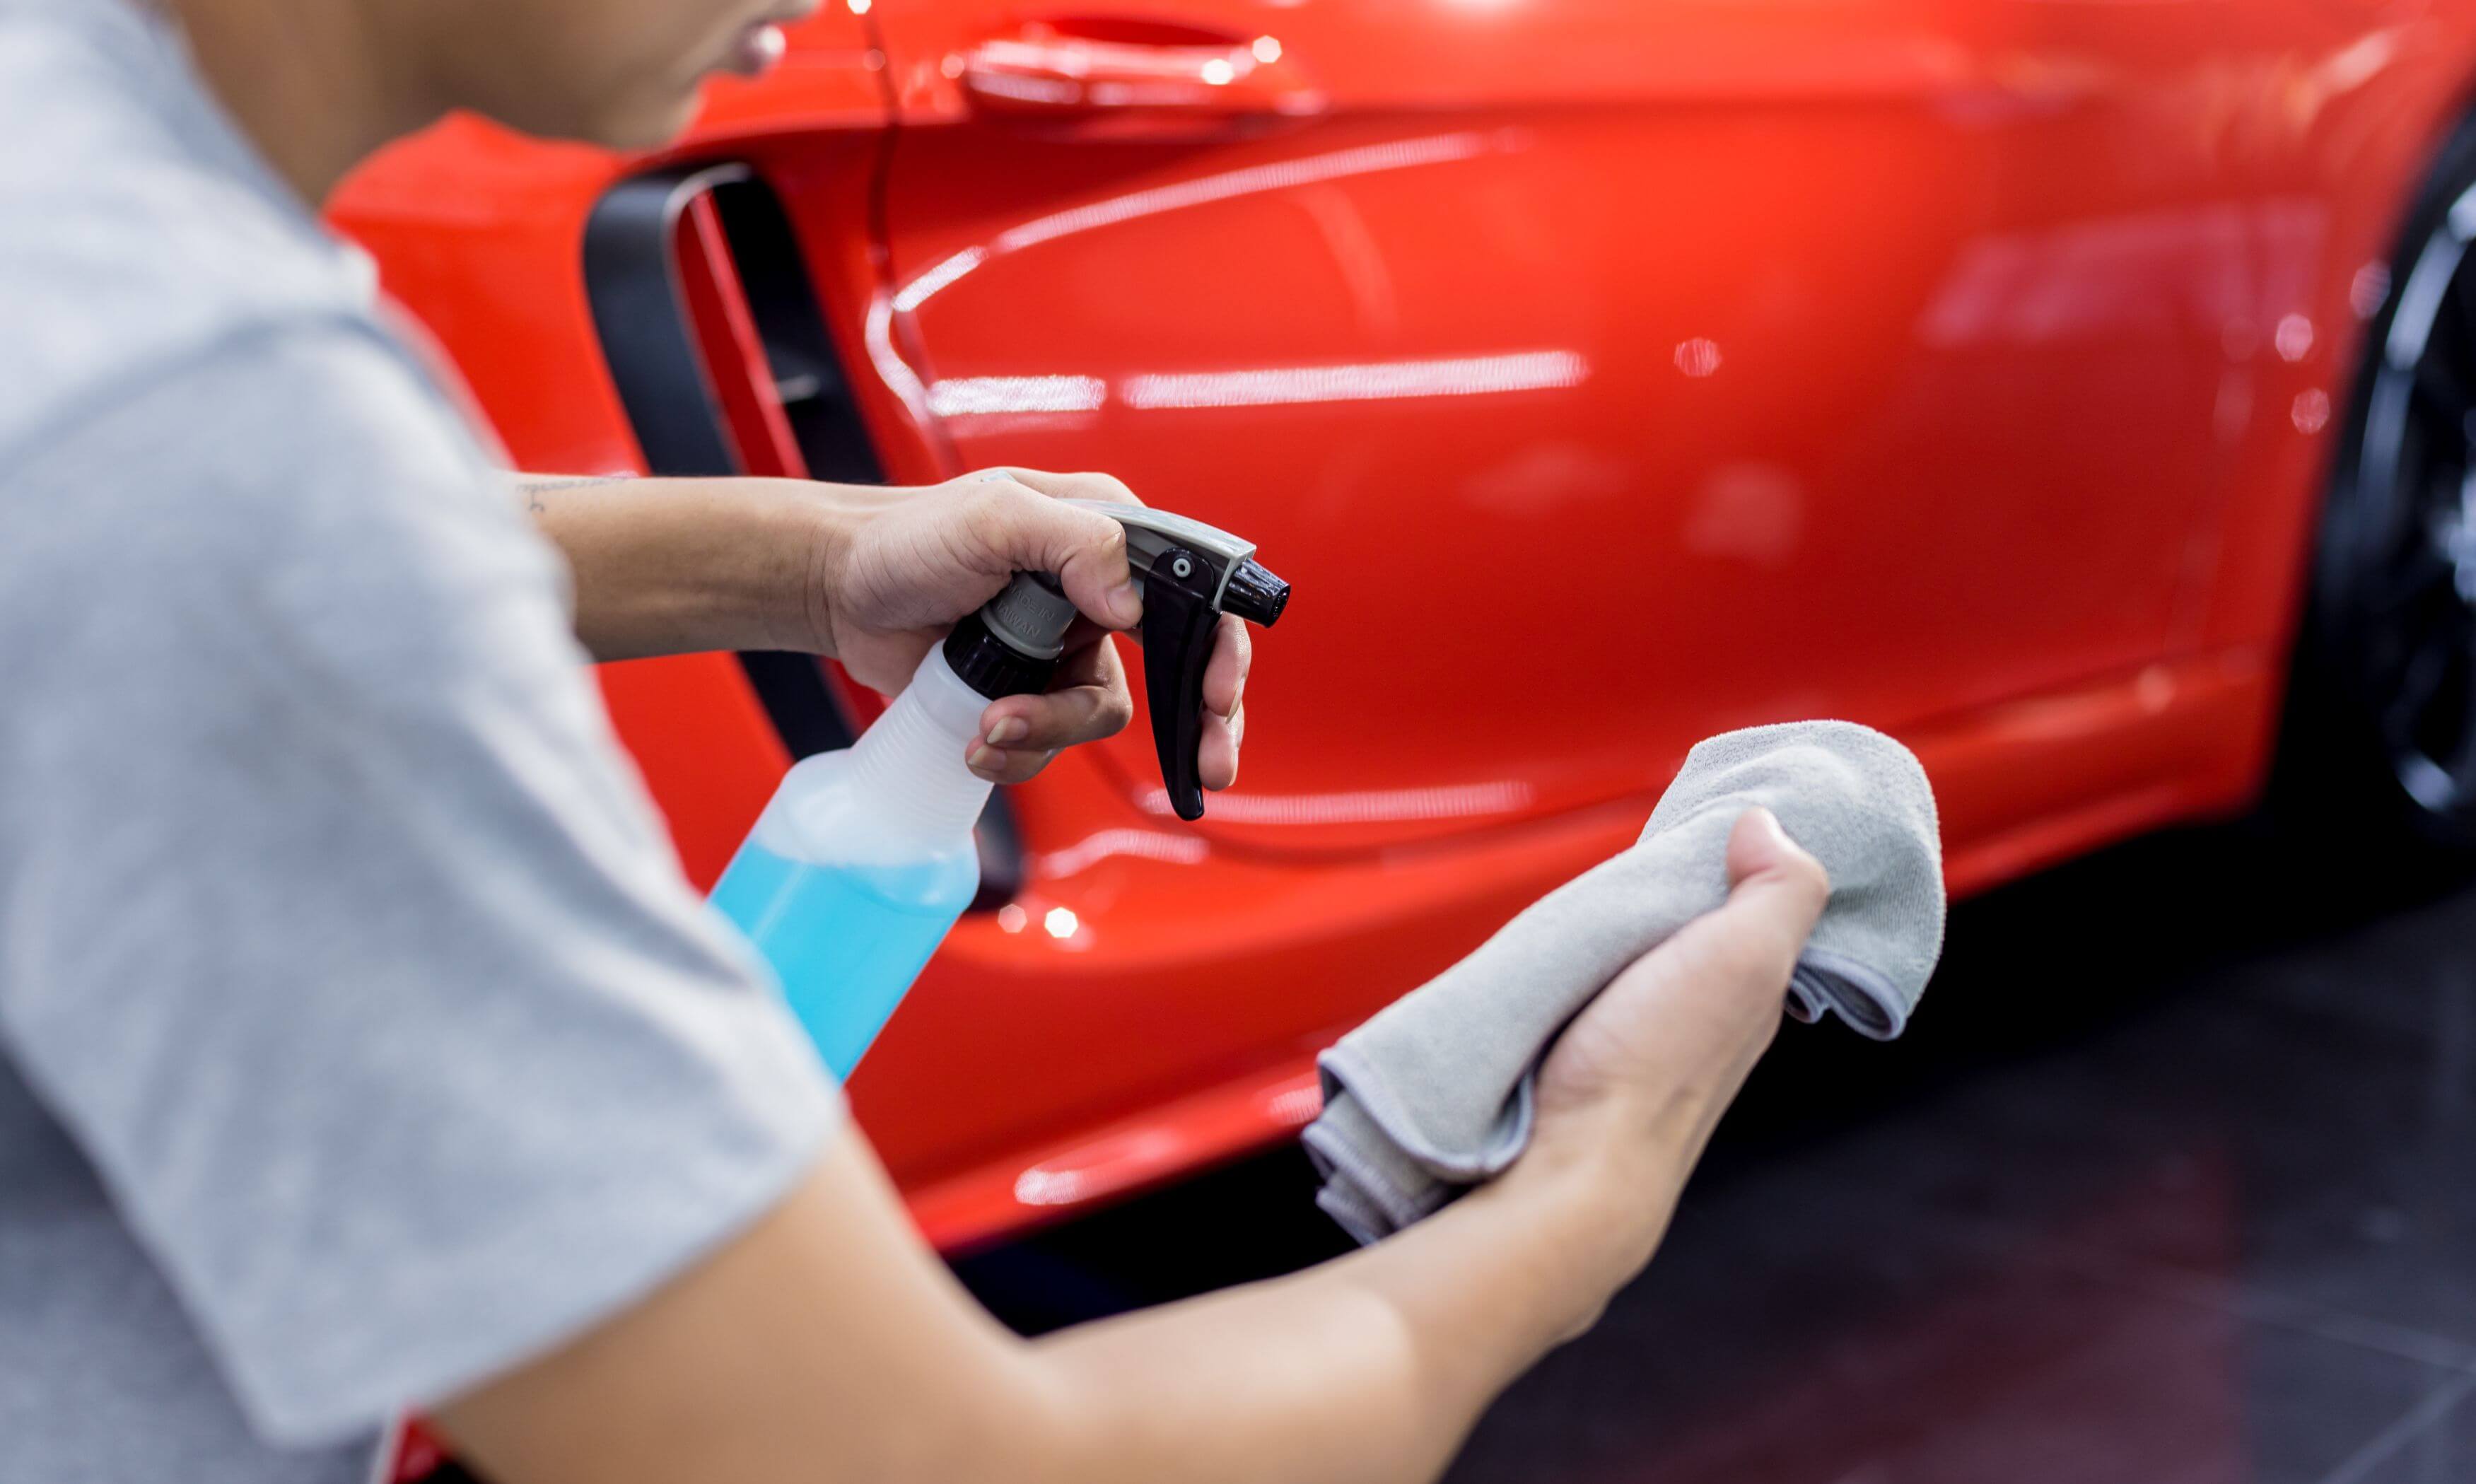 Detailer preparing to clean car by spraying cloth with cleaning solution